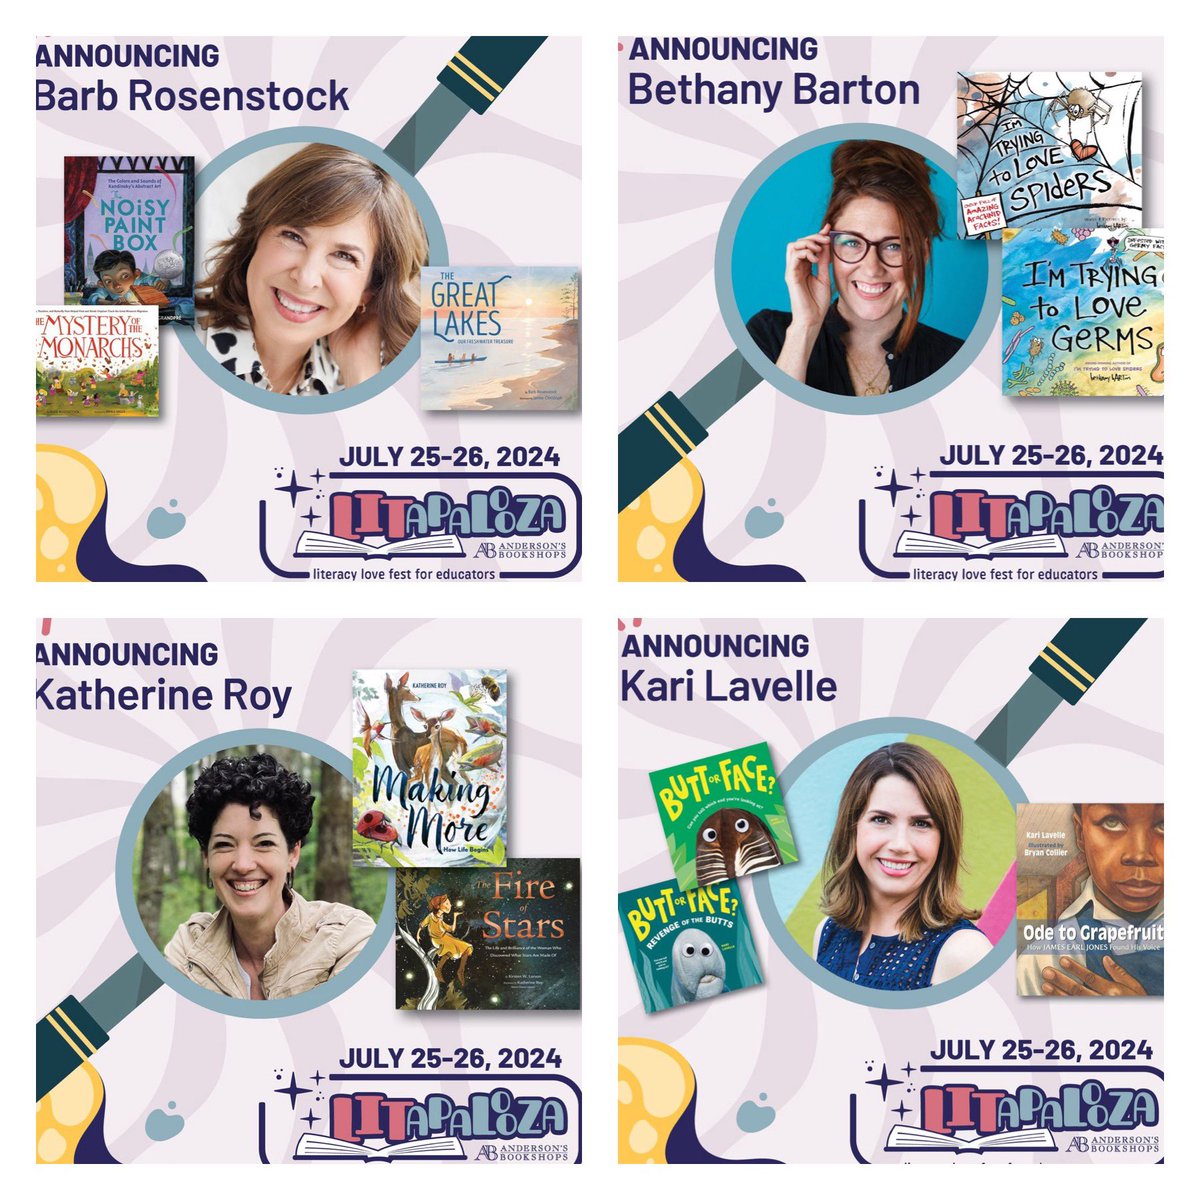 Happy #LITFriday! Who’s ready to learn from these great informational picture book creators? @barbrosenstock @awesomebARTon @KRoyStudio & @KariALavelle will be at #LITapalooza this summer, along with 70 other kidlit creators! 🎉📚❤️ Get your tickets here: eventcombo.com/e/LITapalooza-…